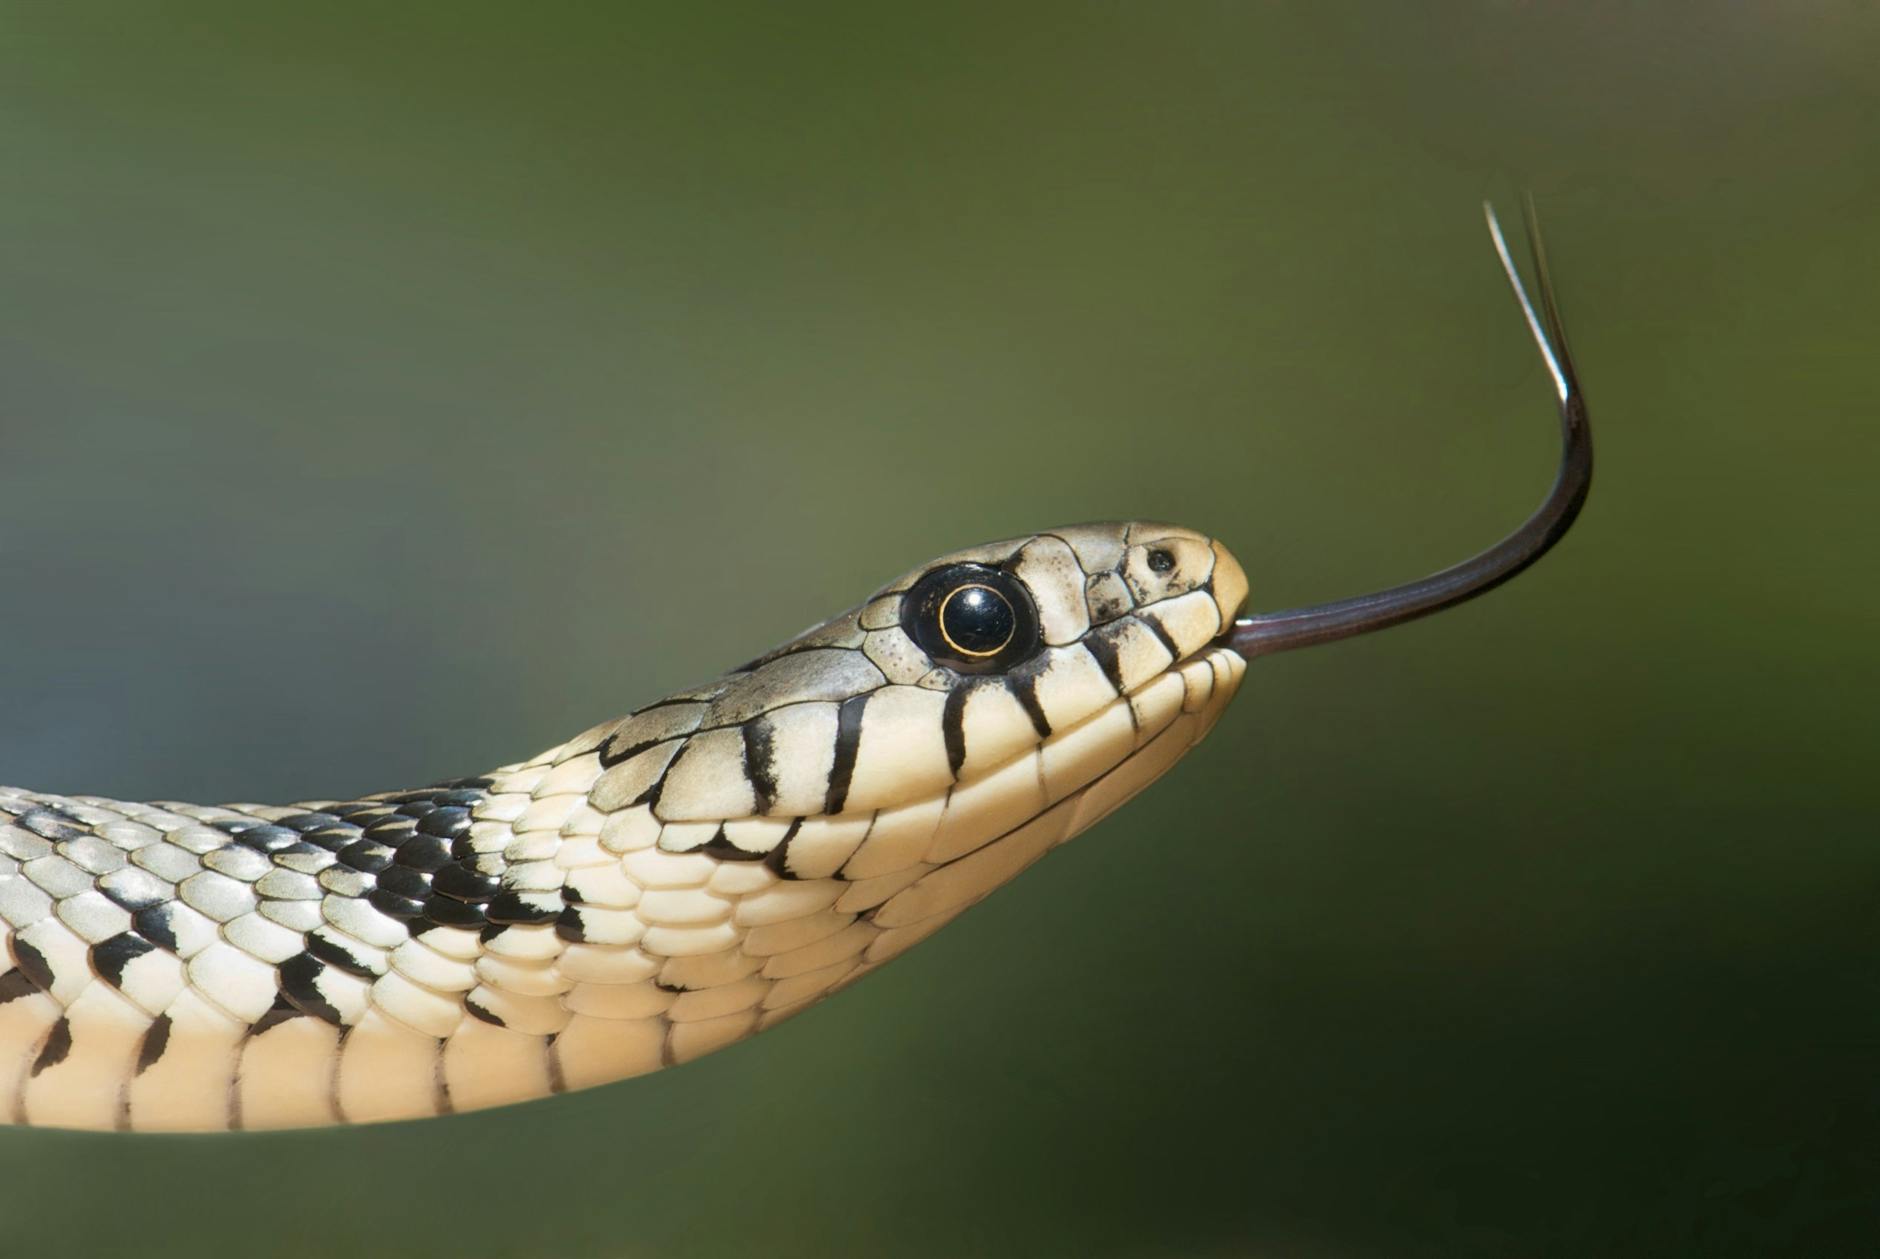 white and black snake on close up photography